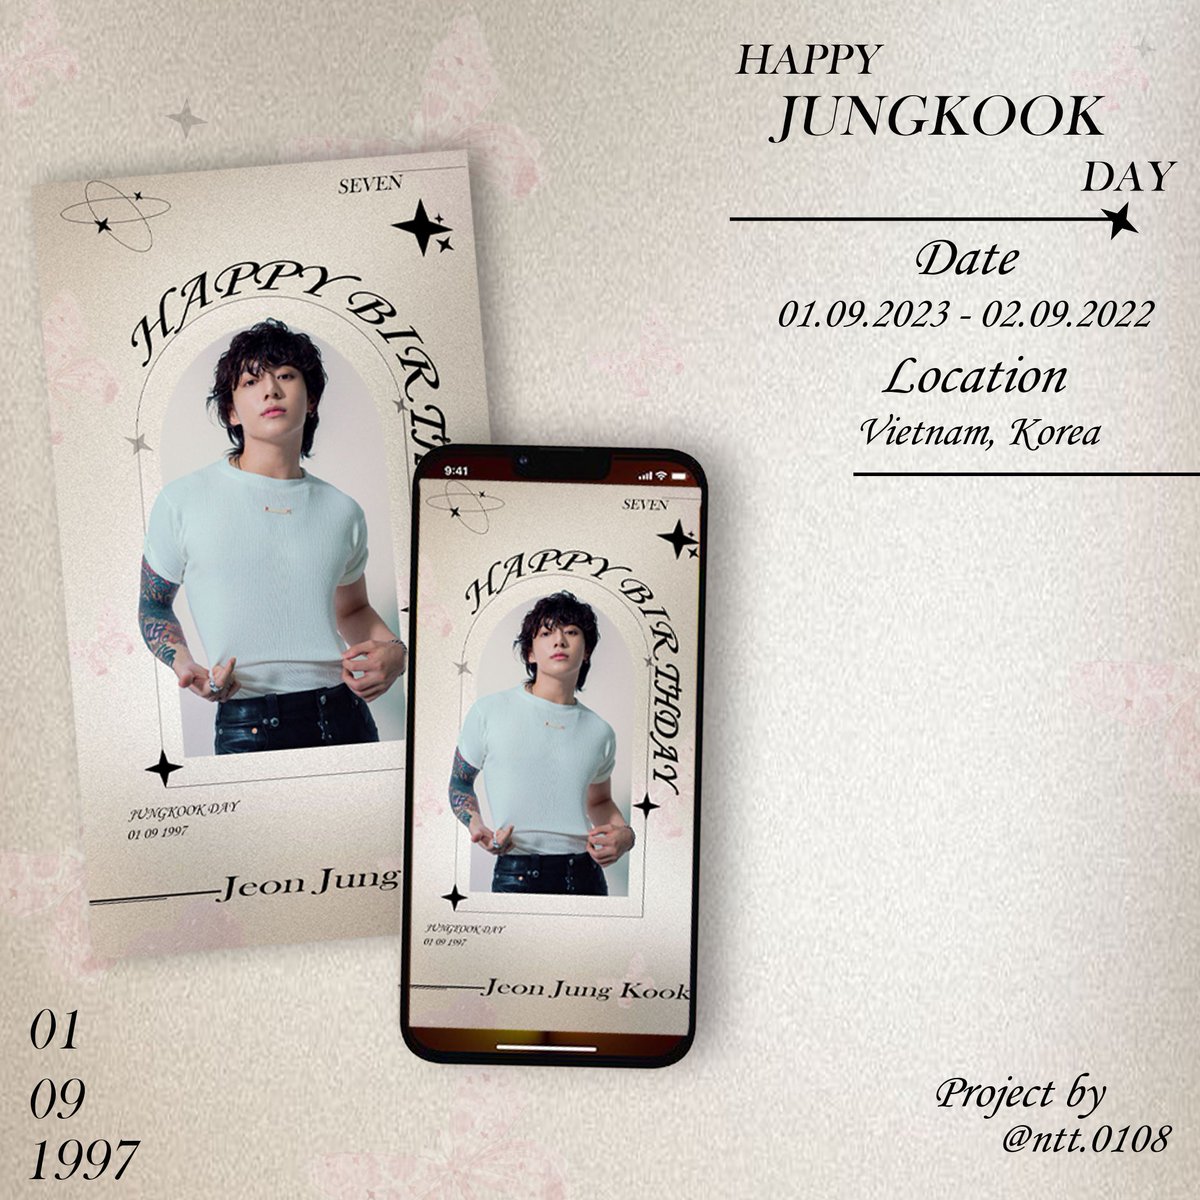 _IG Ads Story

💜Happy Jungkook day💜

⏰ : 01.09.2023 - 02.09.2023
📍 : Vietnam, Korea

If you see our ads, please tag @ntt.0108 on IG thank you so much🙆🏻‍♀️

#JUNGKOOK #정국 #BTS #방탄소년단 #JUNGKOOKDAY #HappyBirthdayJungkook
#HappyJungkookDay
#JK27thAnniversary @BTS_twt